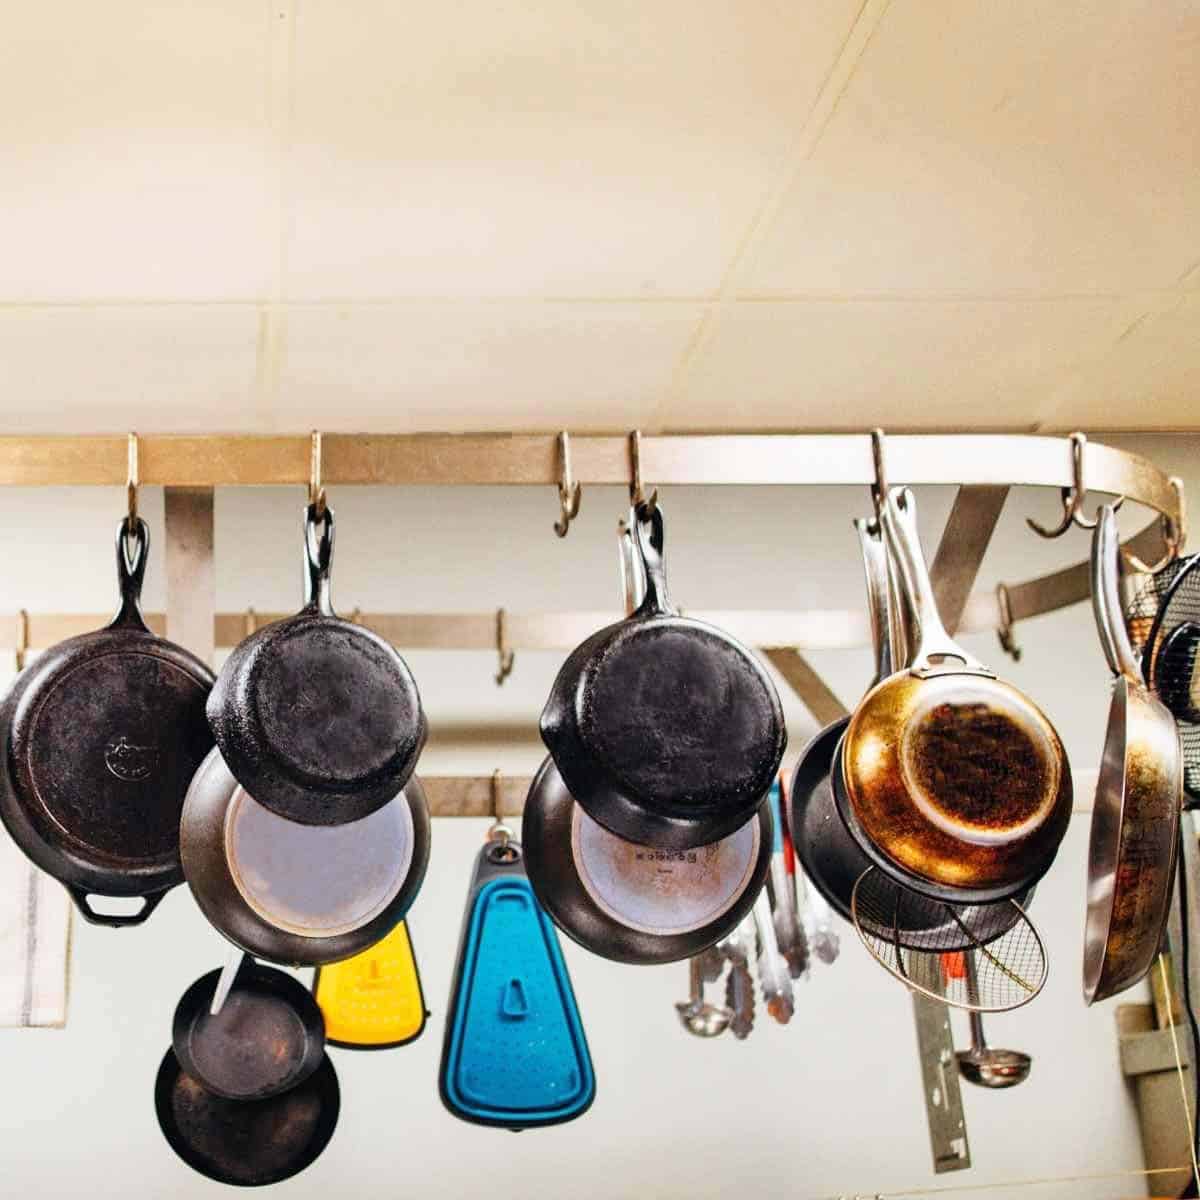 A ceiling mounted pot rack filled with 10 different frying pans and skillets.